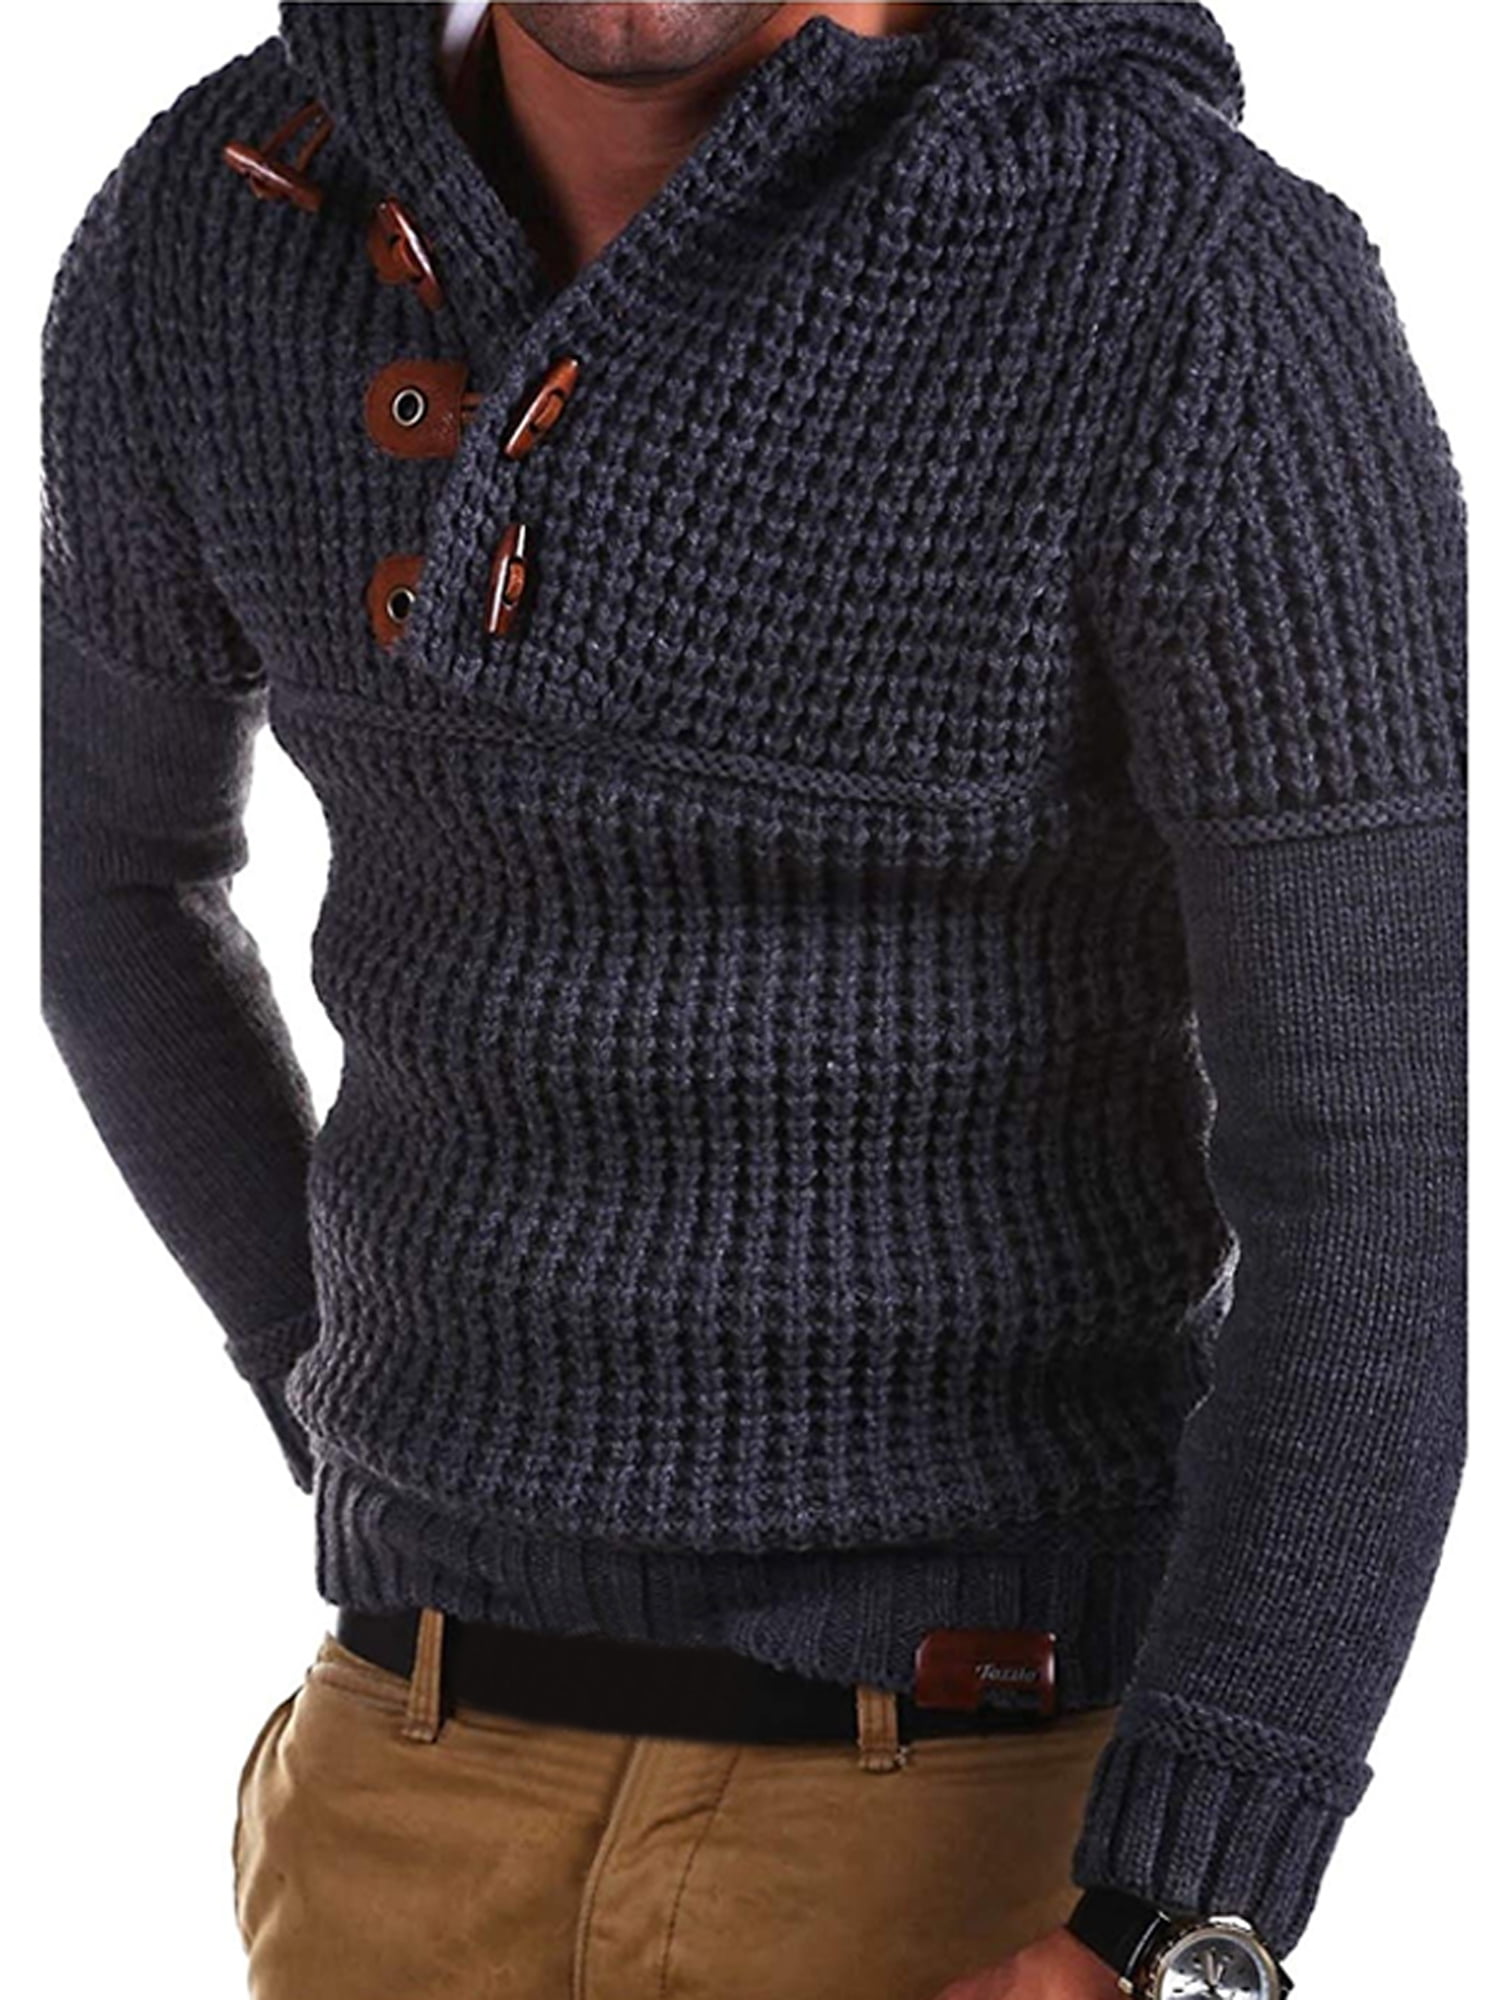 Cardigan Men's Winter Jumper Top Hooded Pullover Casual Knitwear Knitted Sweater